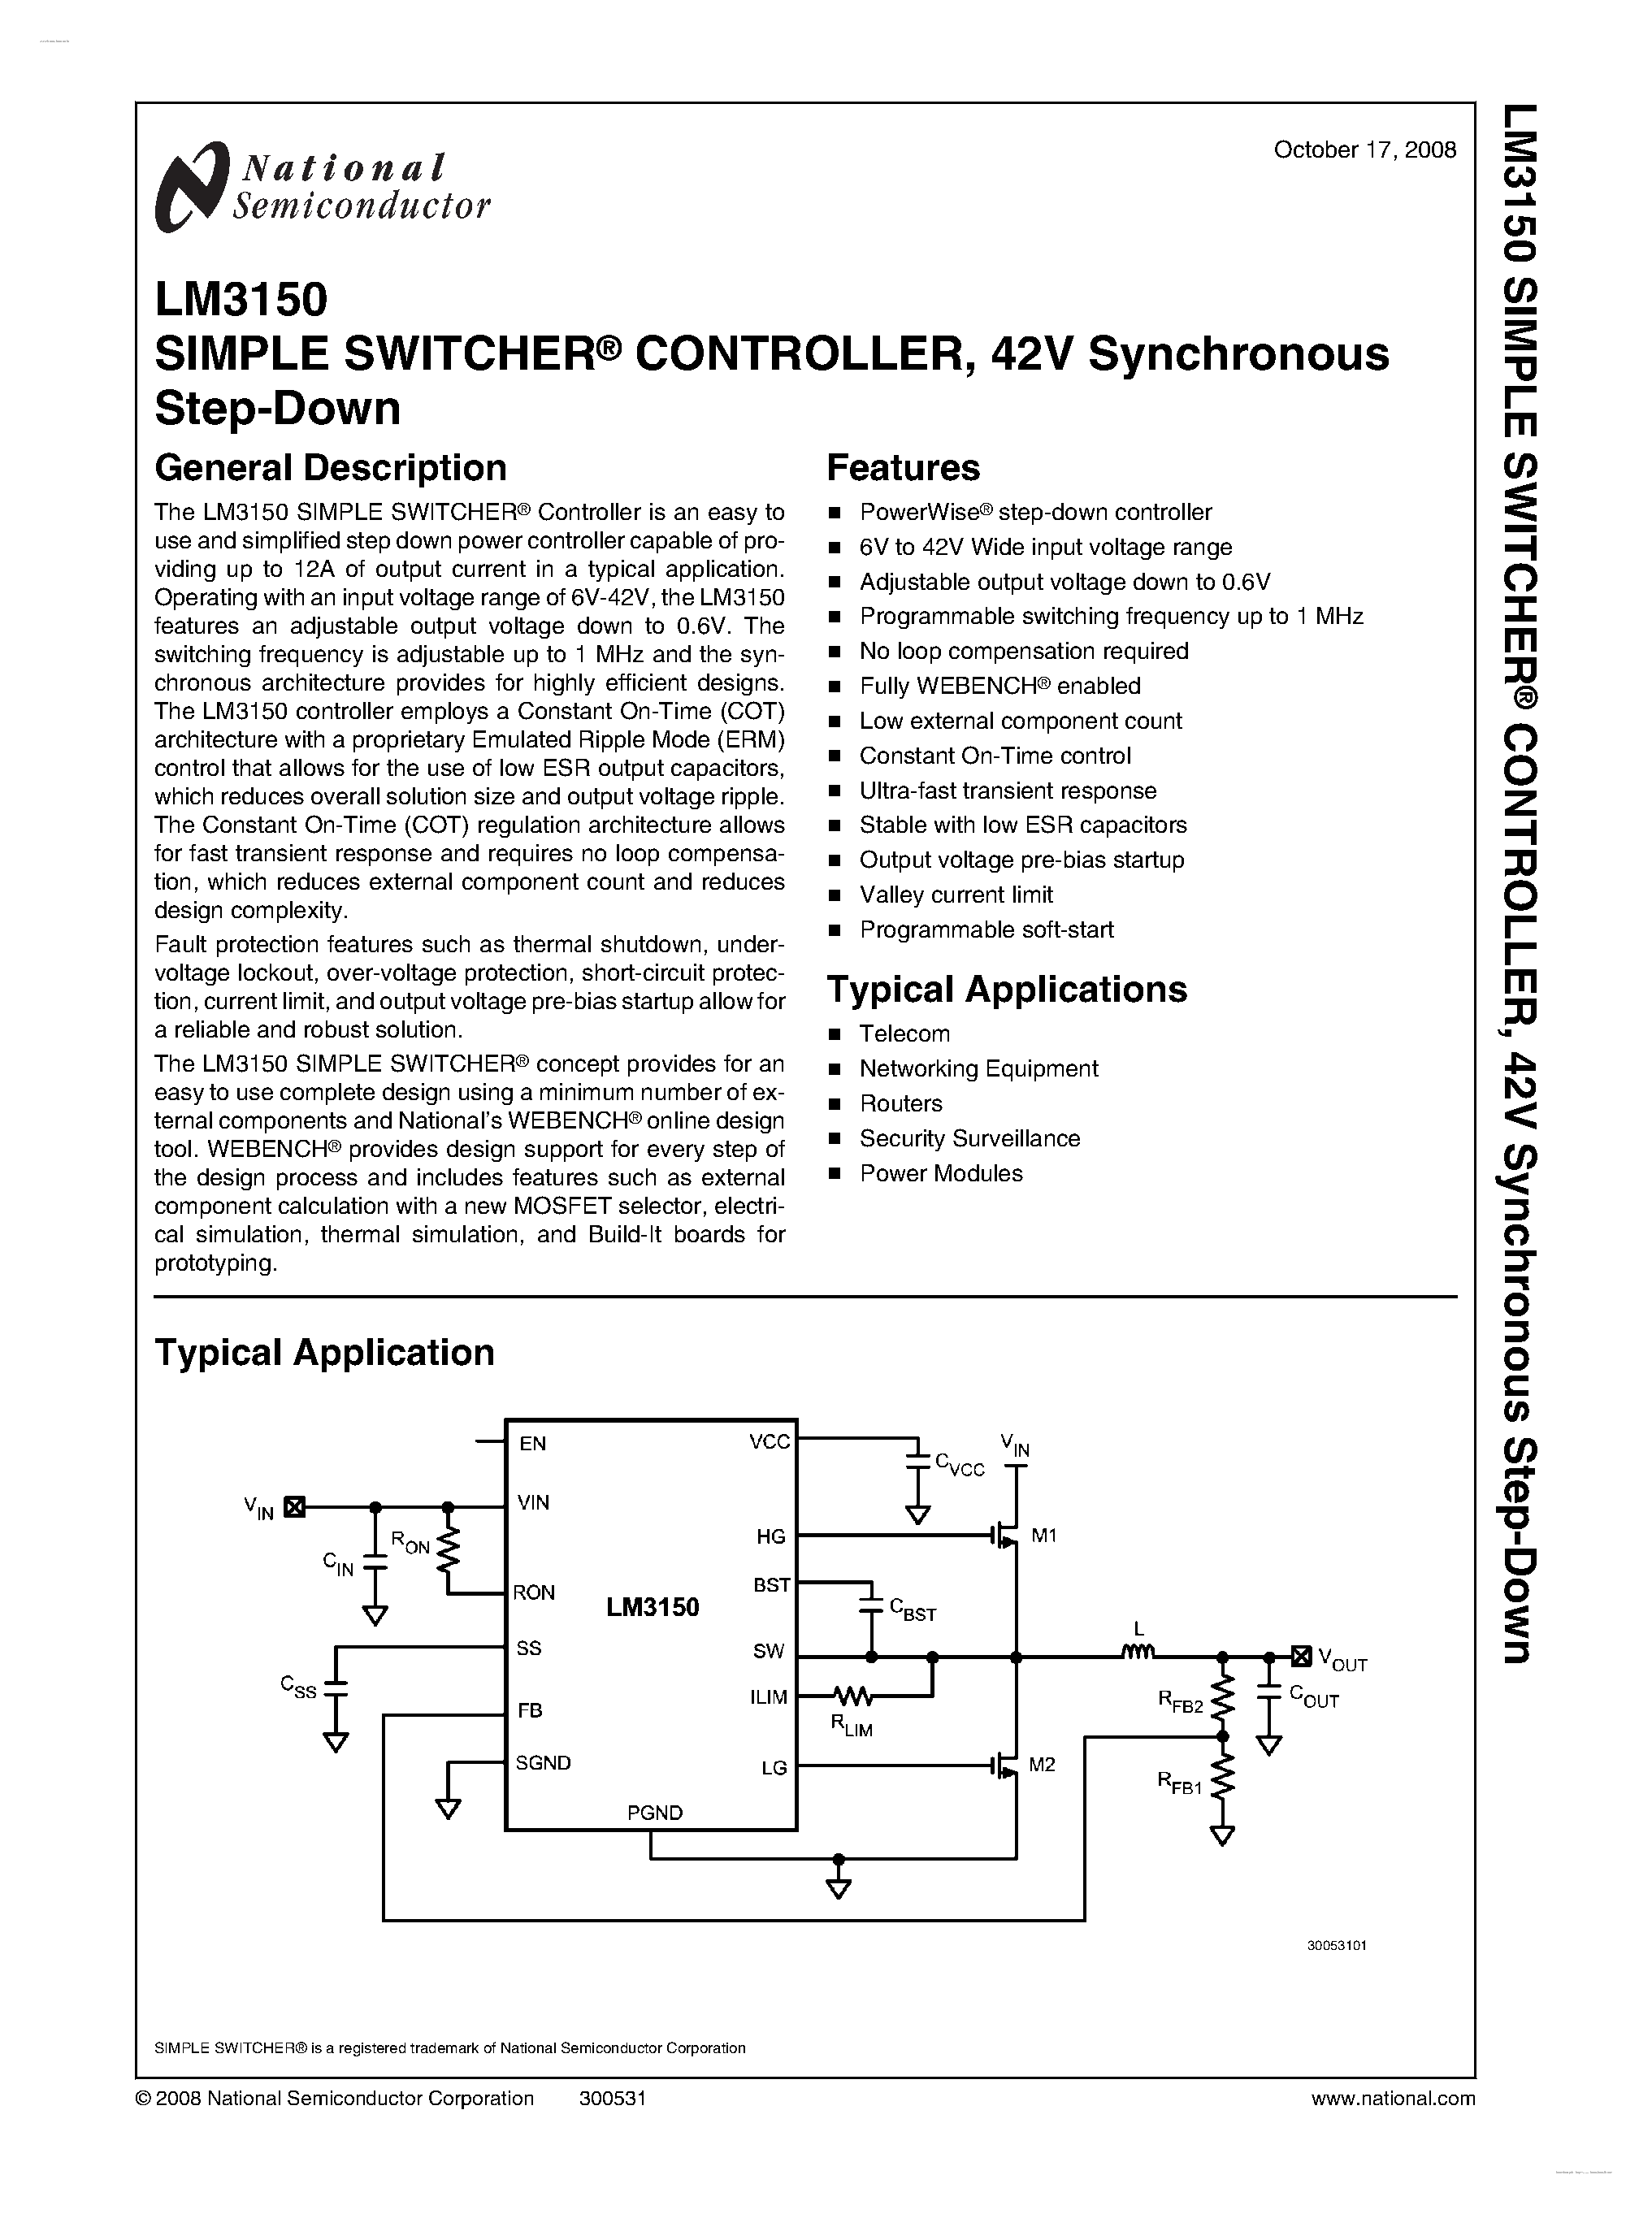 Даташит LM3150 - SIMPLE SWITCHER CONTROLLER страница 1